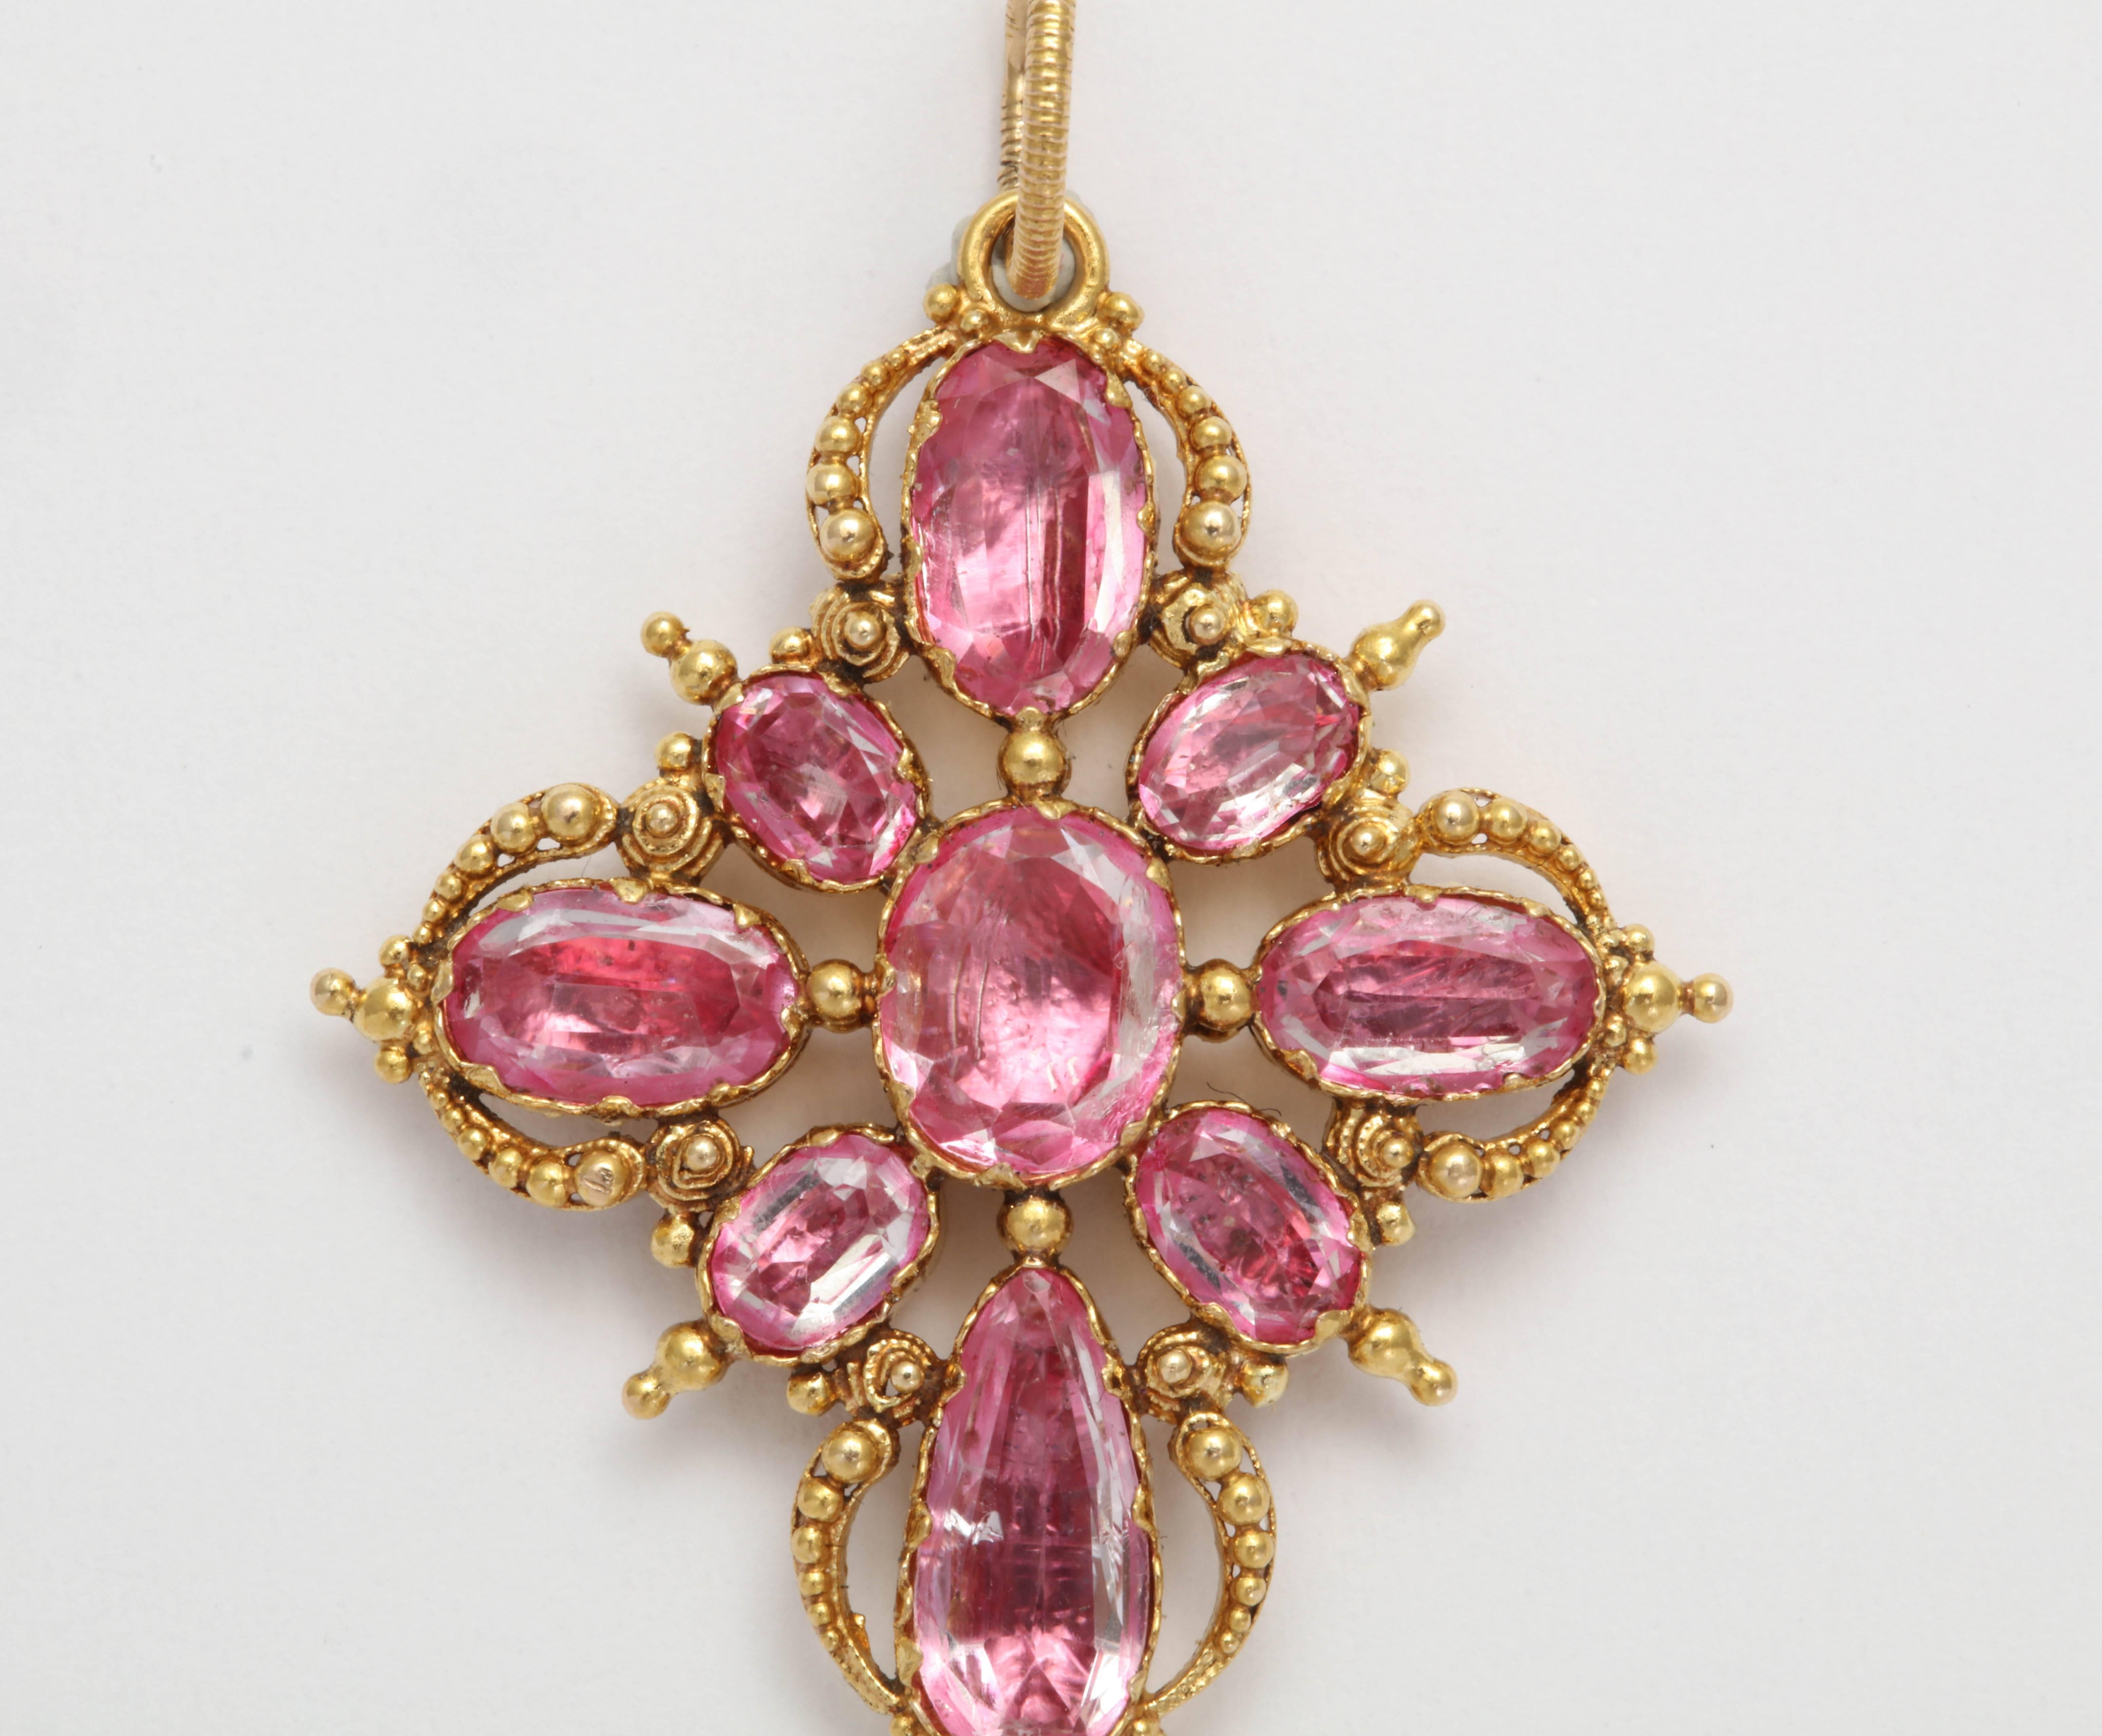 Pink Topaz of the highest quality is set in closed back high carat yellow gold. The stones are very pink and have a lot of life to them. Beaded wire work surrounds the stones. English made in the Georgian era. 